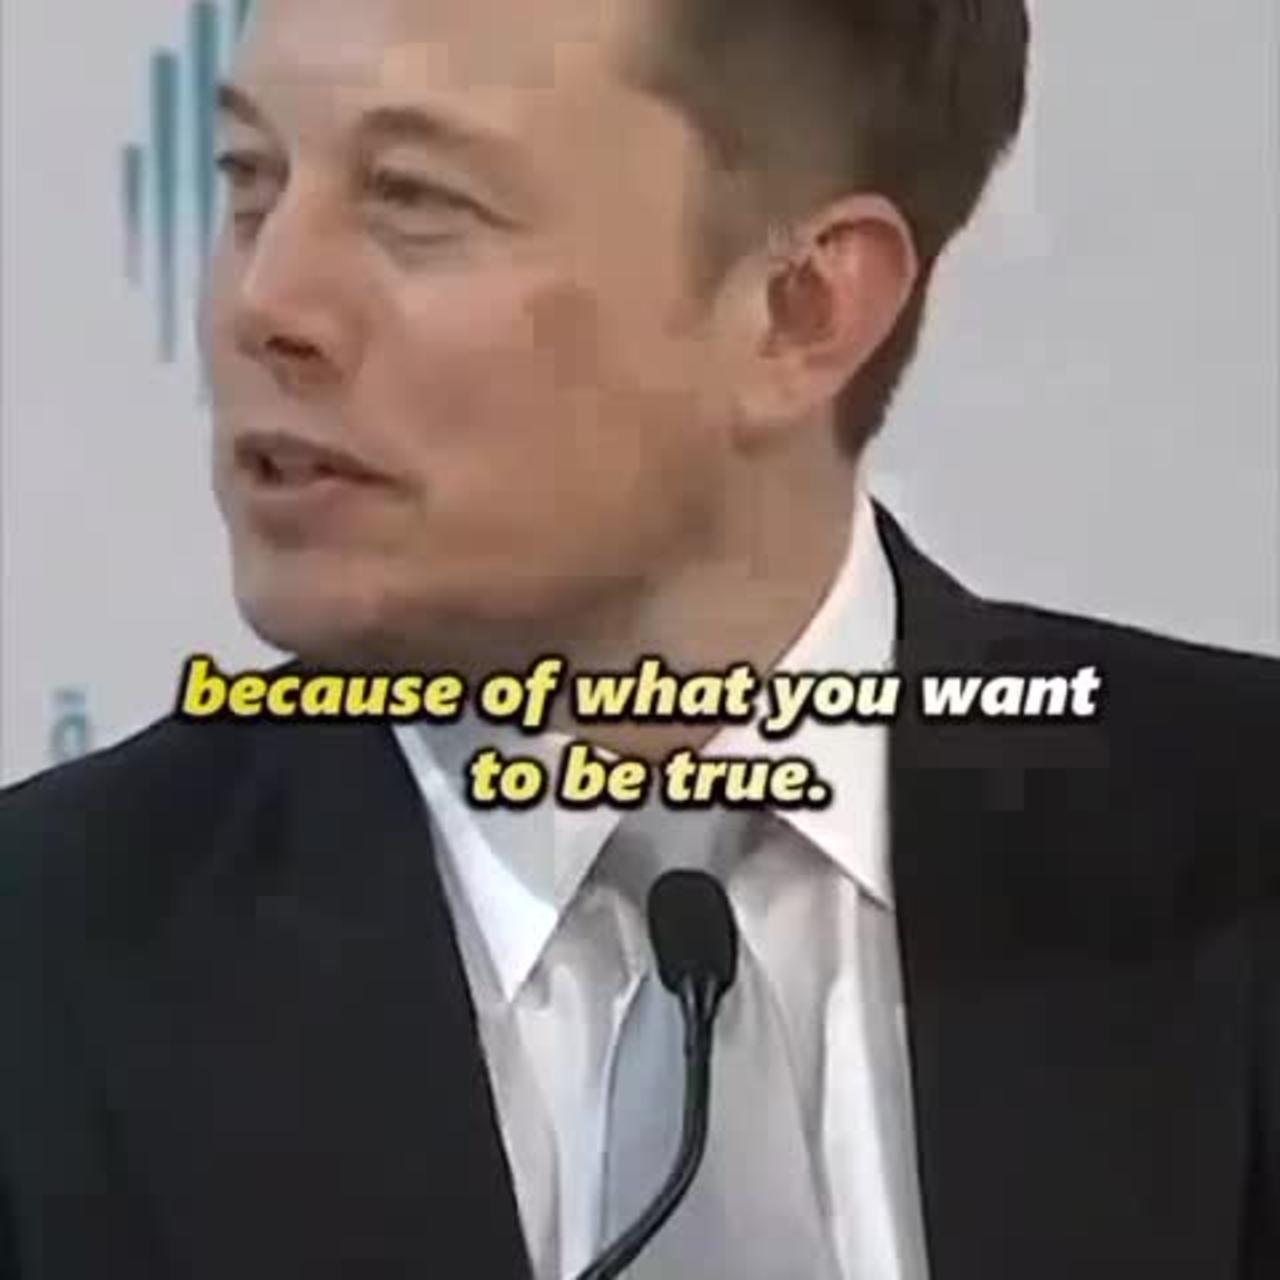 ELON MUSK ON HOW TO BE TRUE TO YOURSELF